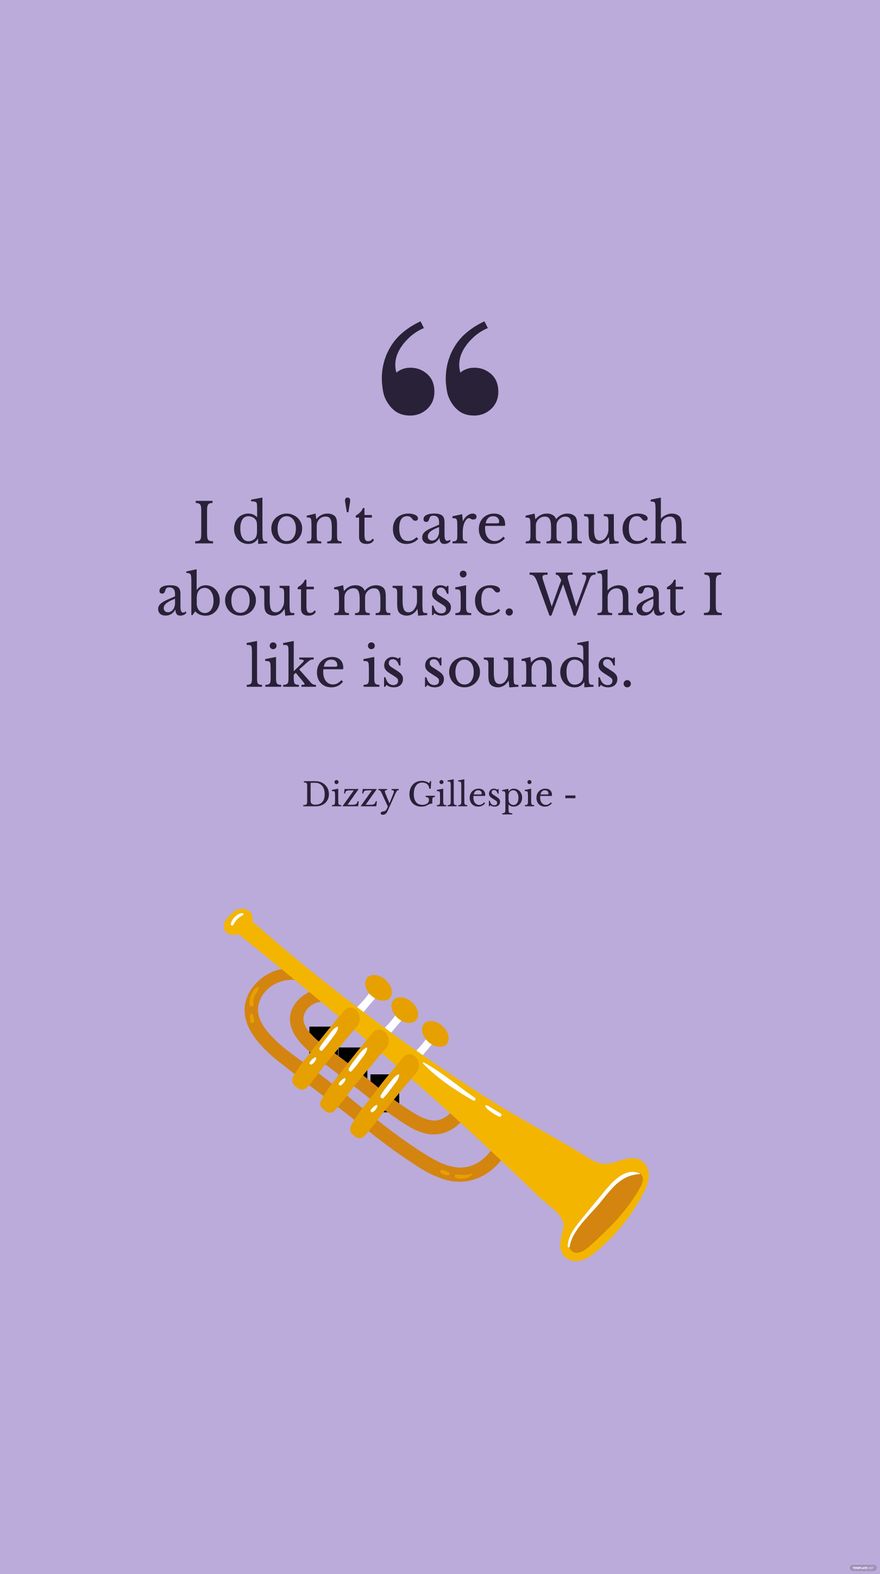 Free Dizzy Gillespie - I don't care much about music. What I like is sounds. in JPG